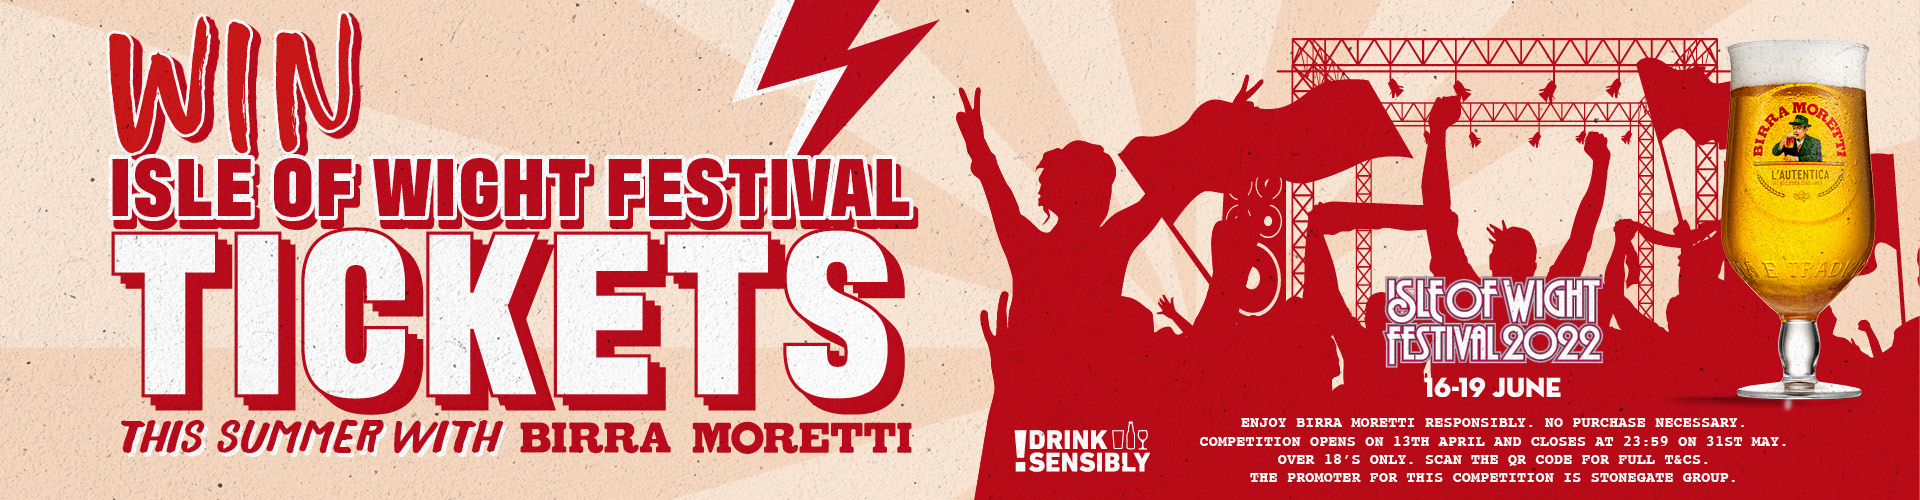 Win Isle of Wight Festival Tickets this Summer with Birra Moretti